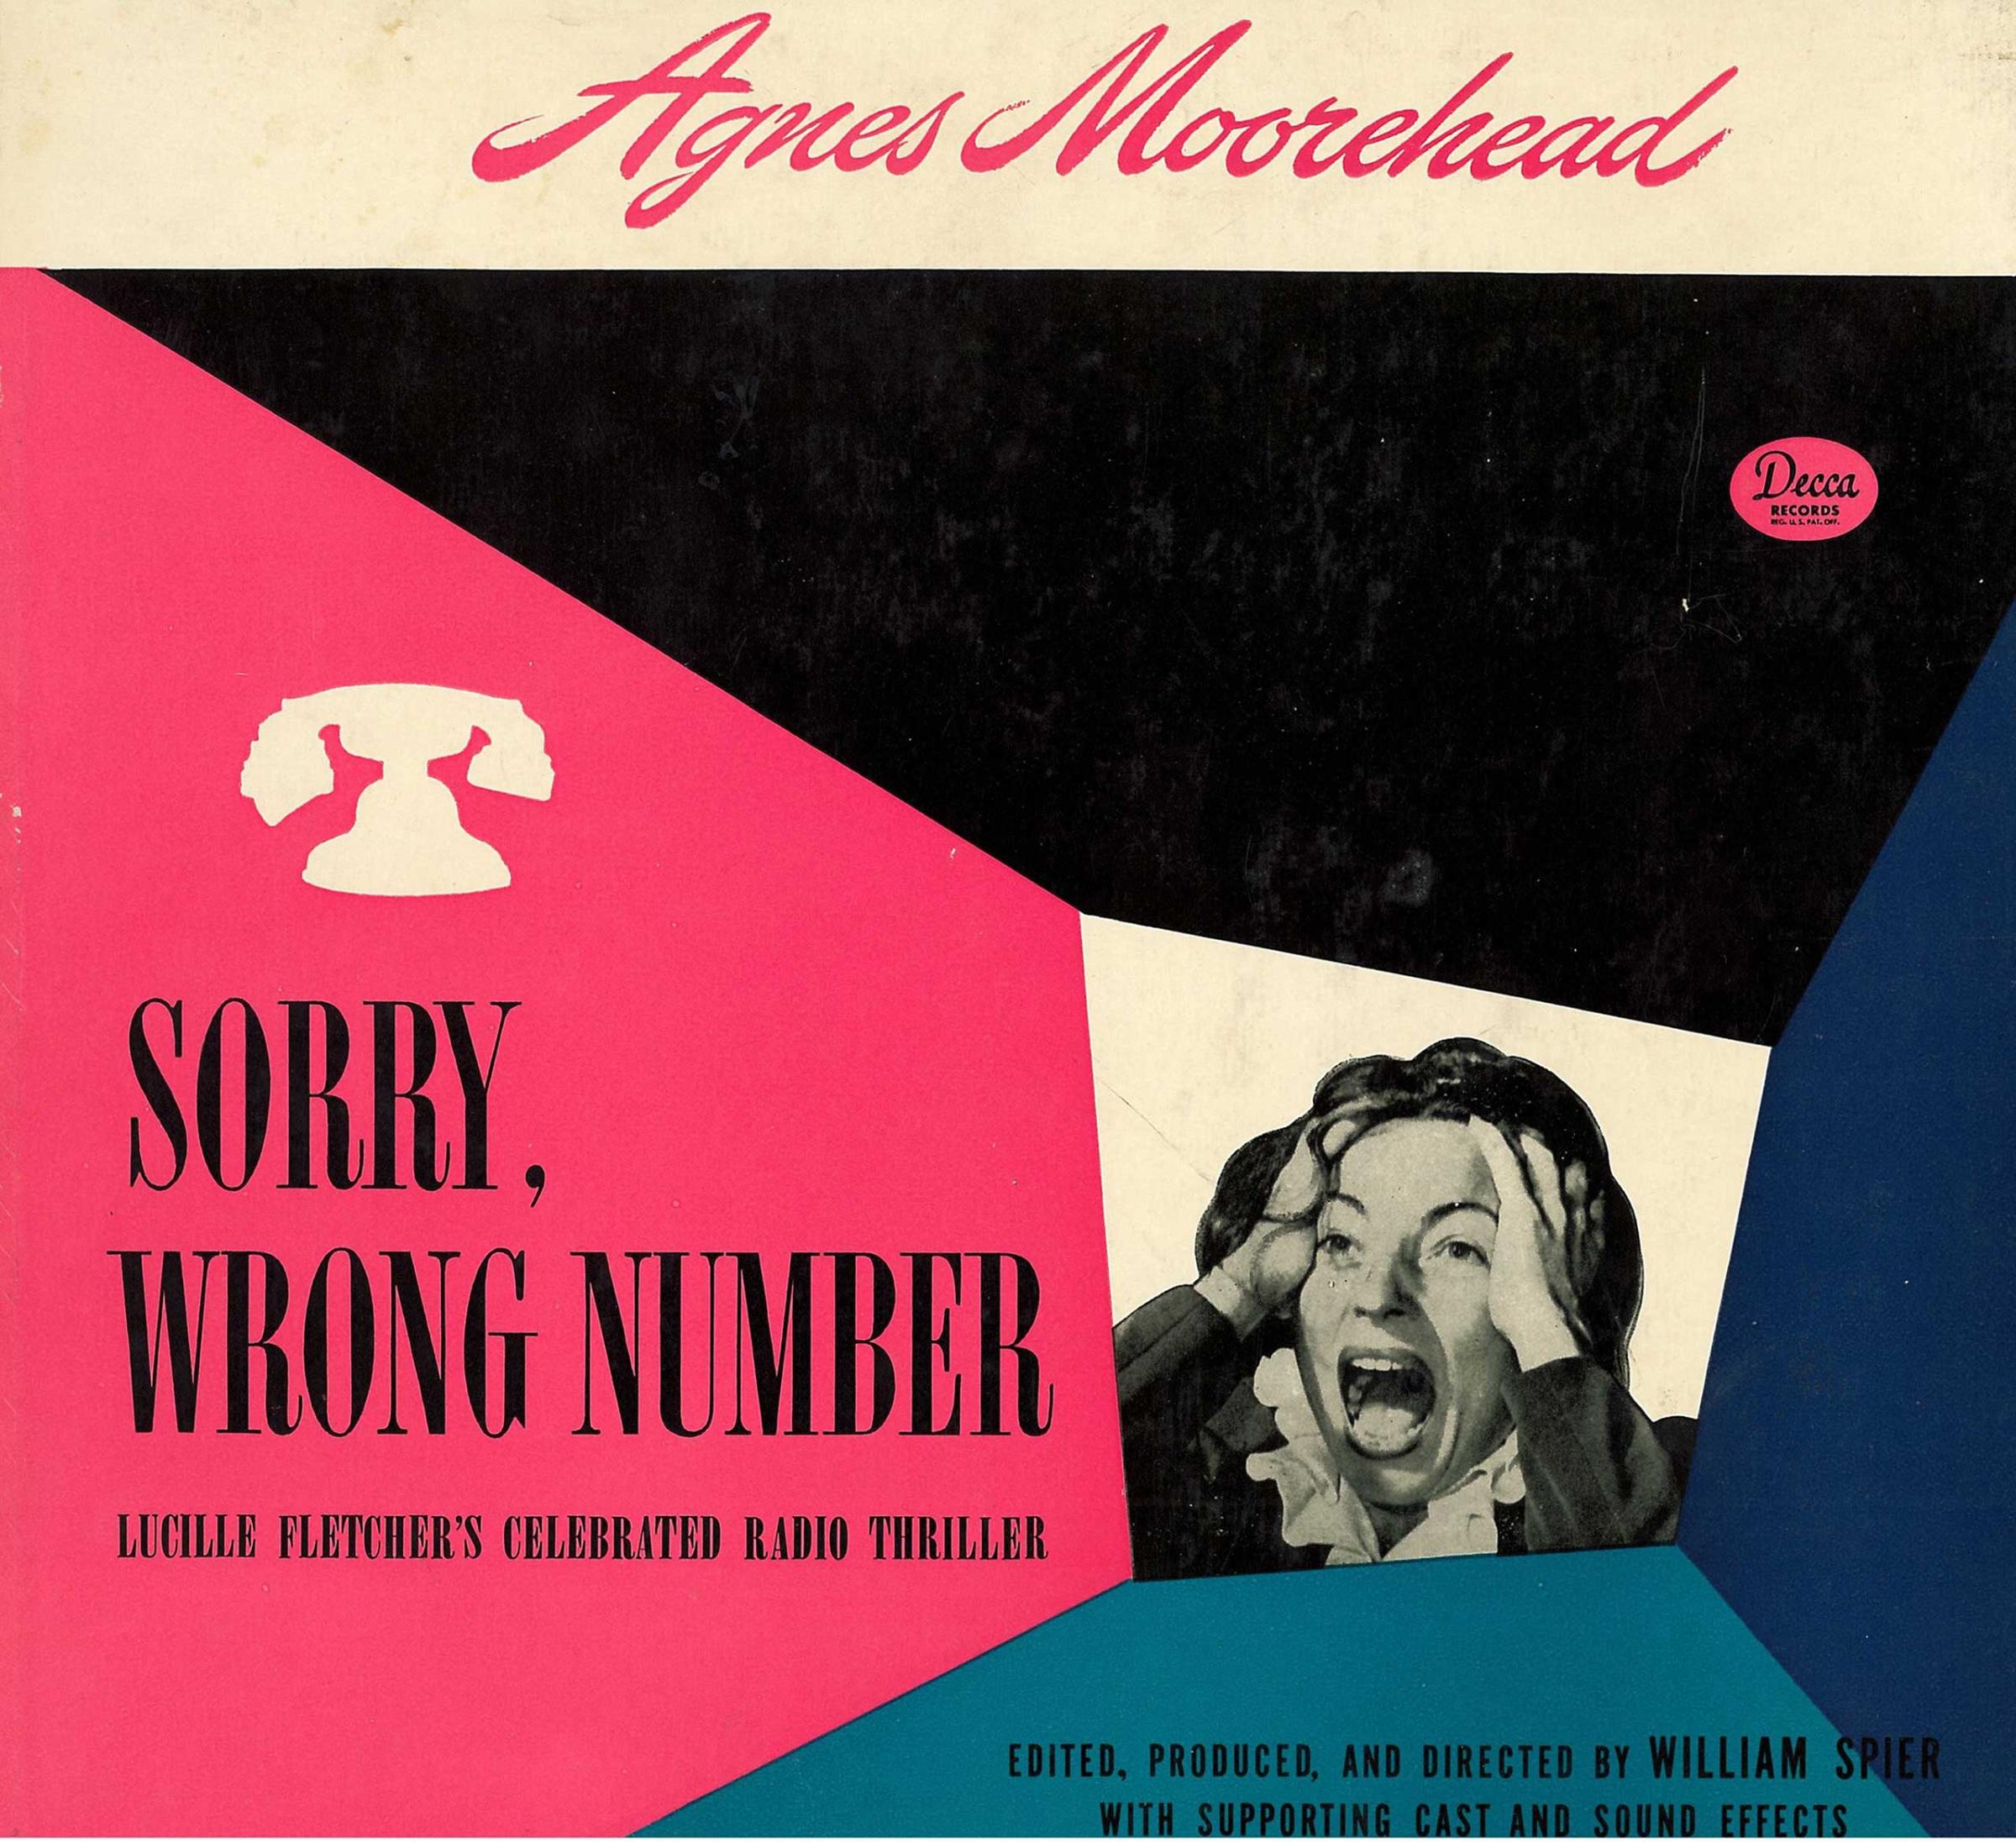 “Sorry, Wrong Number” 1947 Decca issue. Courtesy Decca.